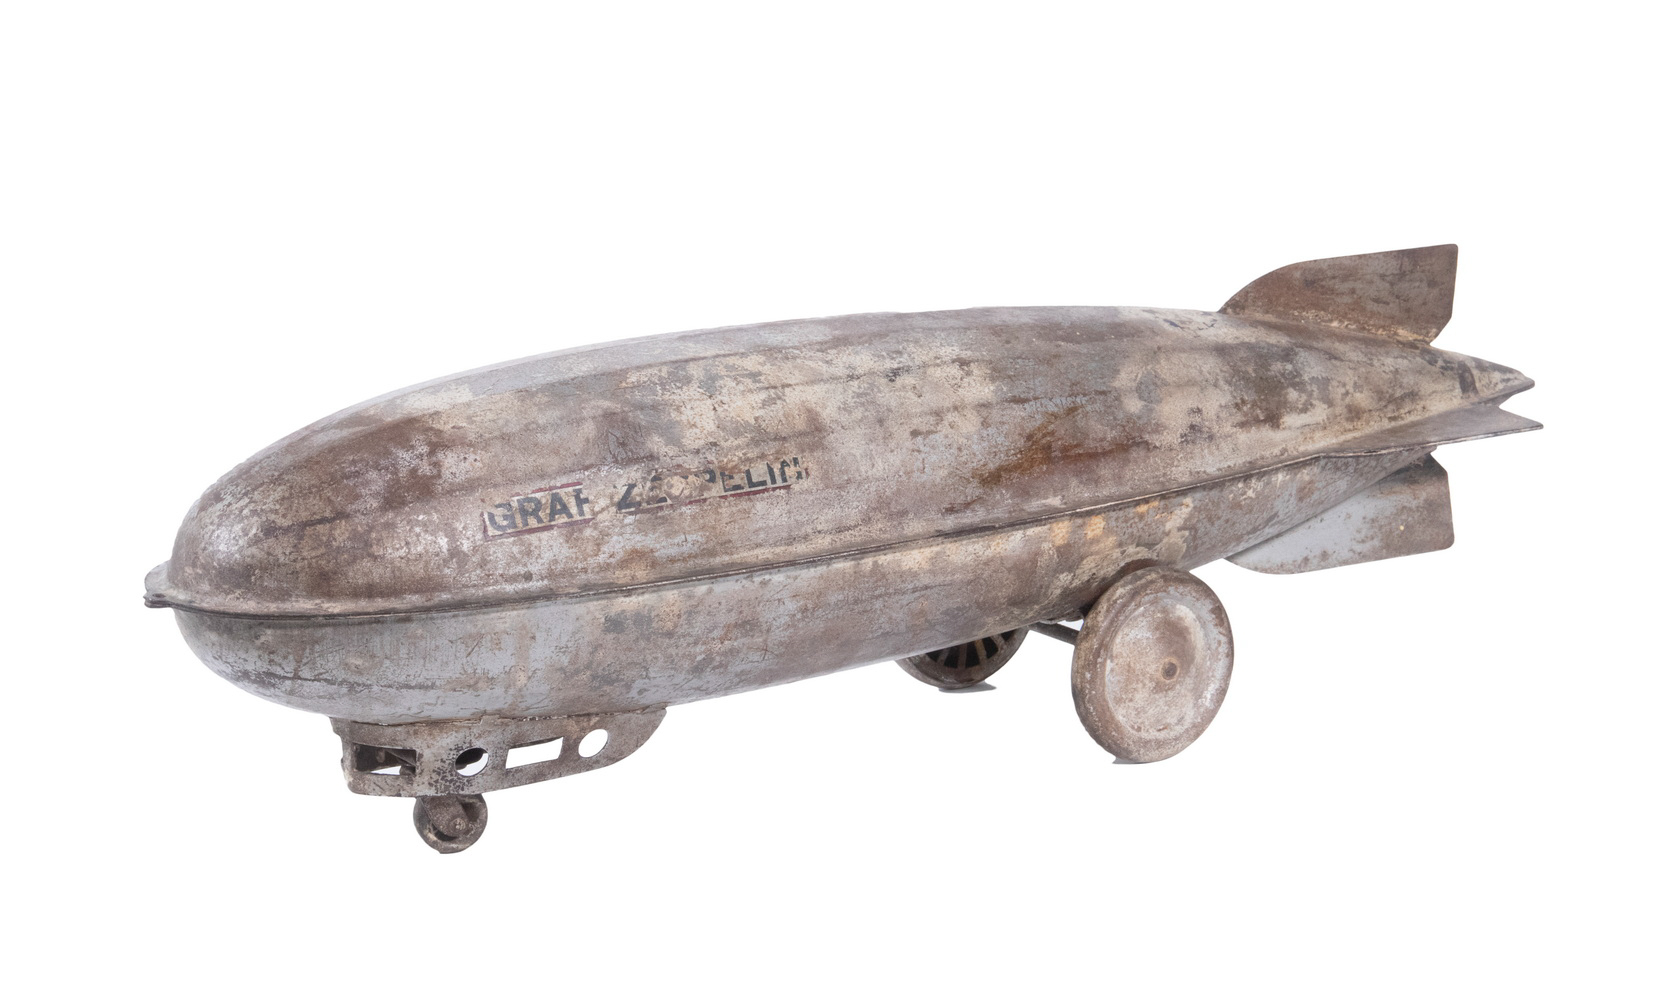 "GRAF ZEPPELIN" AIRSHIP PULL TOY